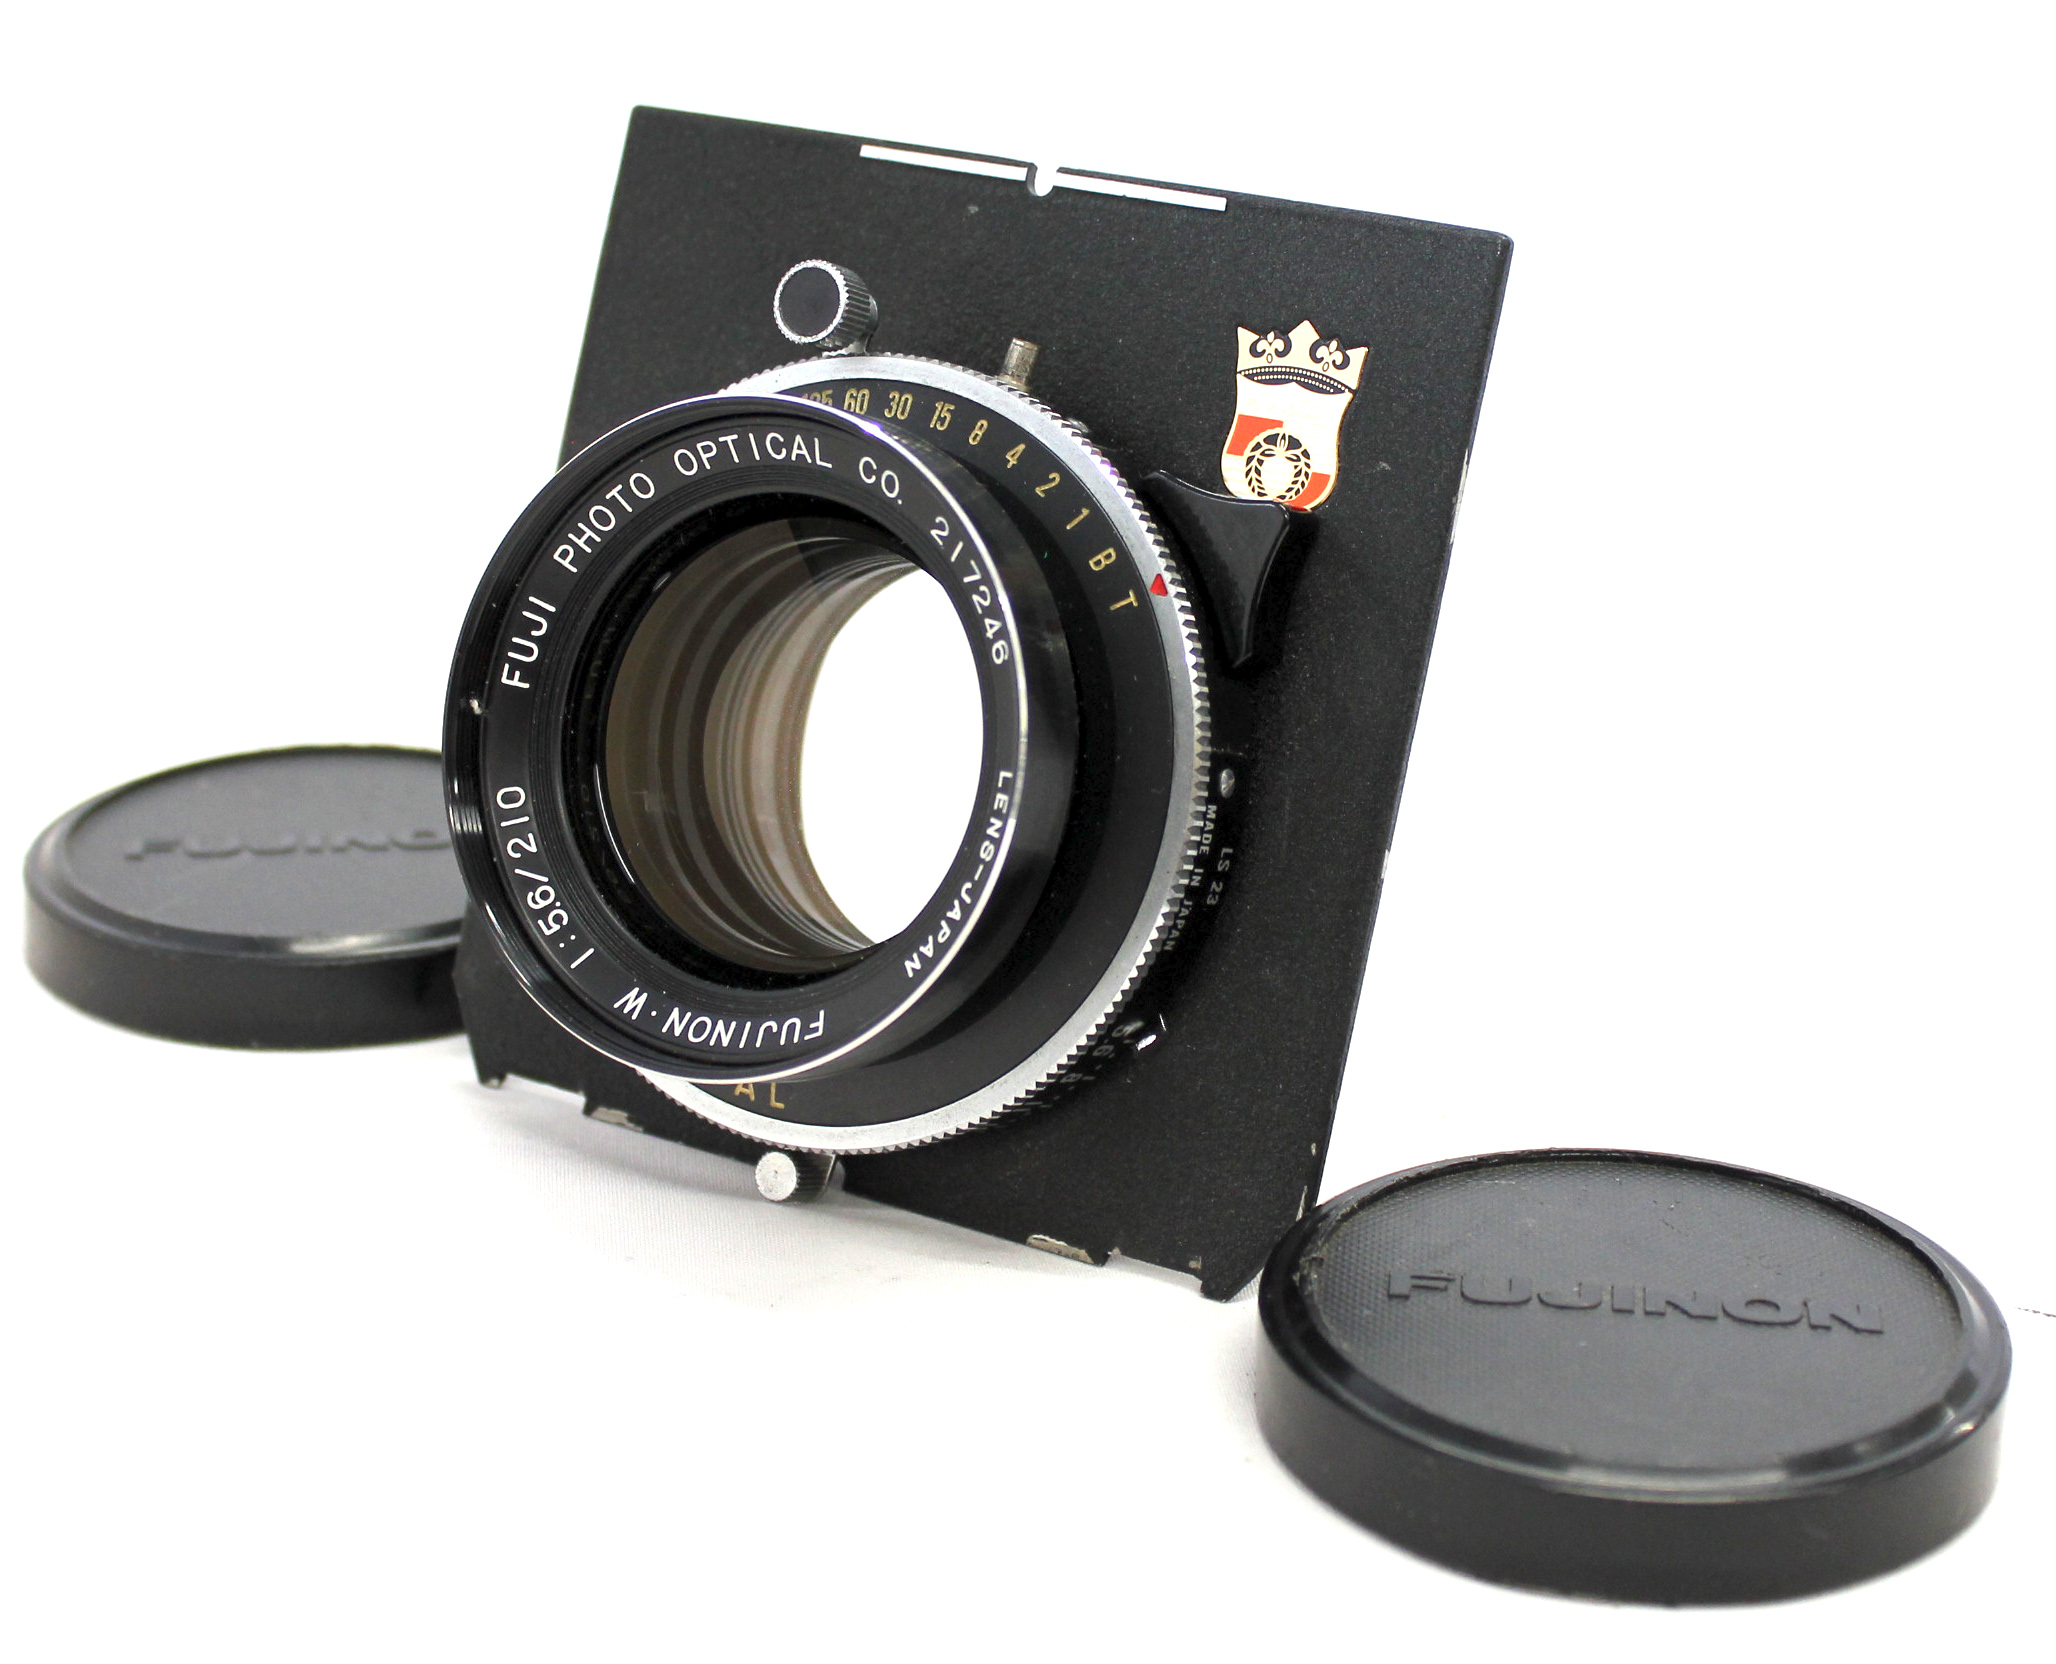 Japan Used Camera Shop | [Excellent++++] Fuji Fujinon W 210mm F/5.6 4x5 Large Format Lens with Copal Shutter from Japan